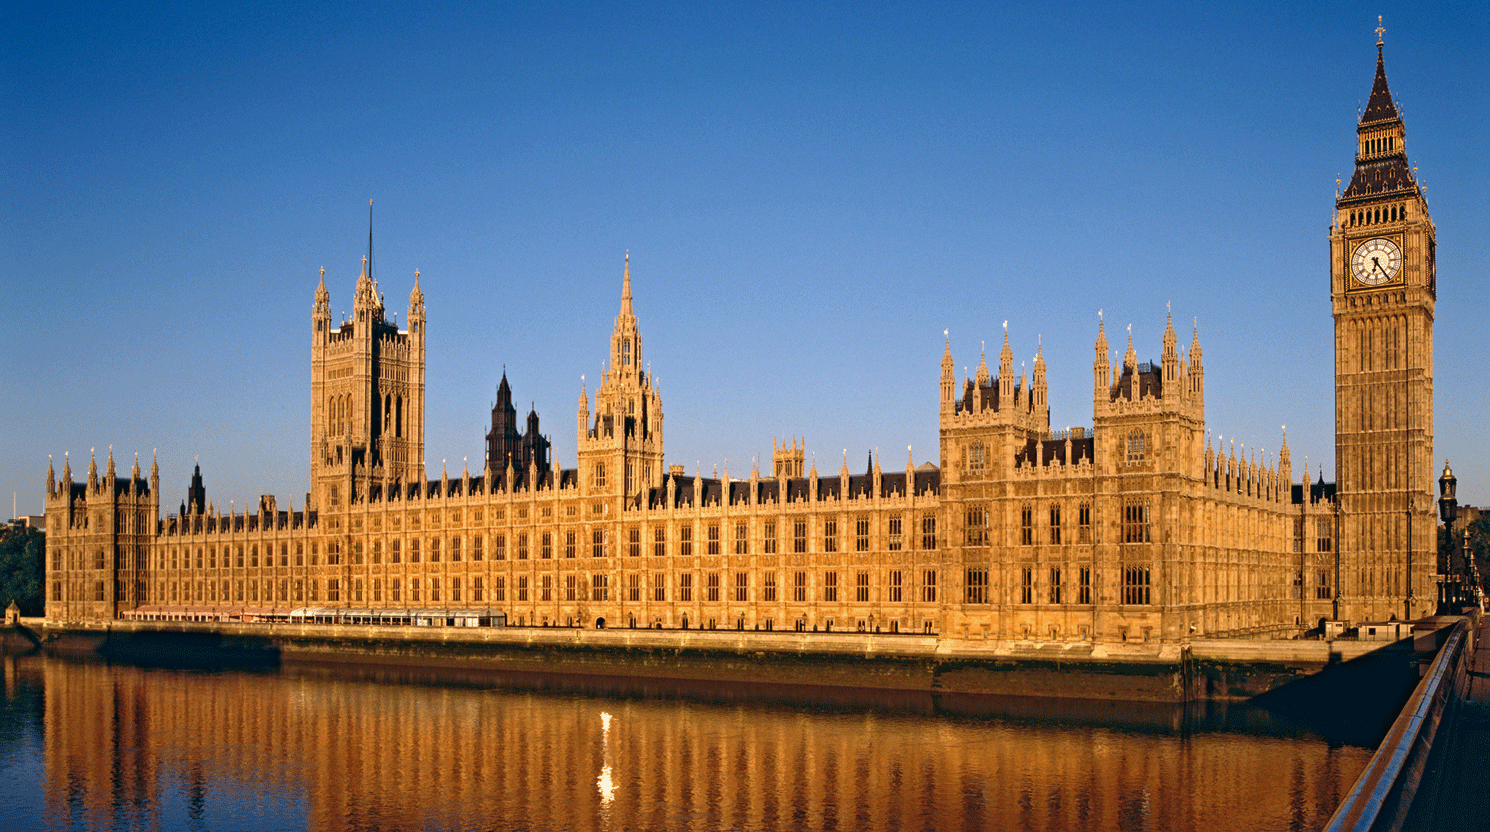 HQ Palace Of Westminster Wallpapers | File 723.58Kb